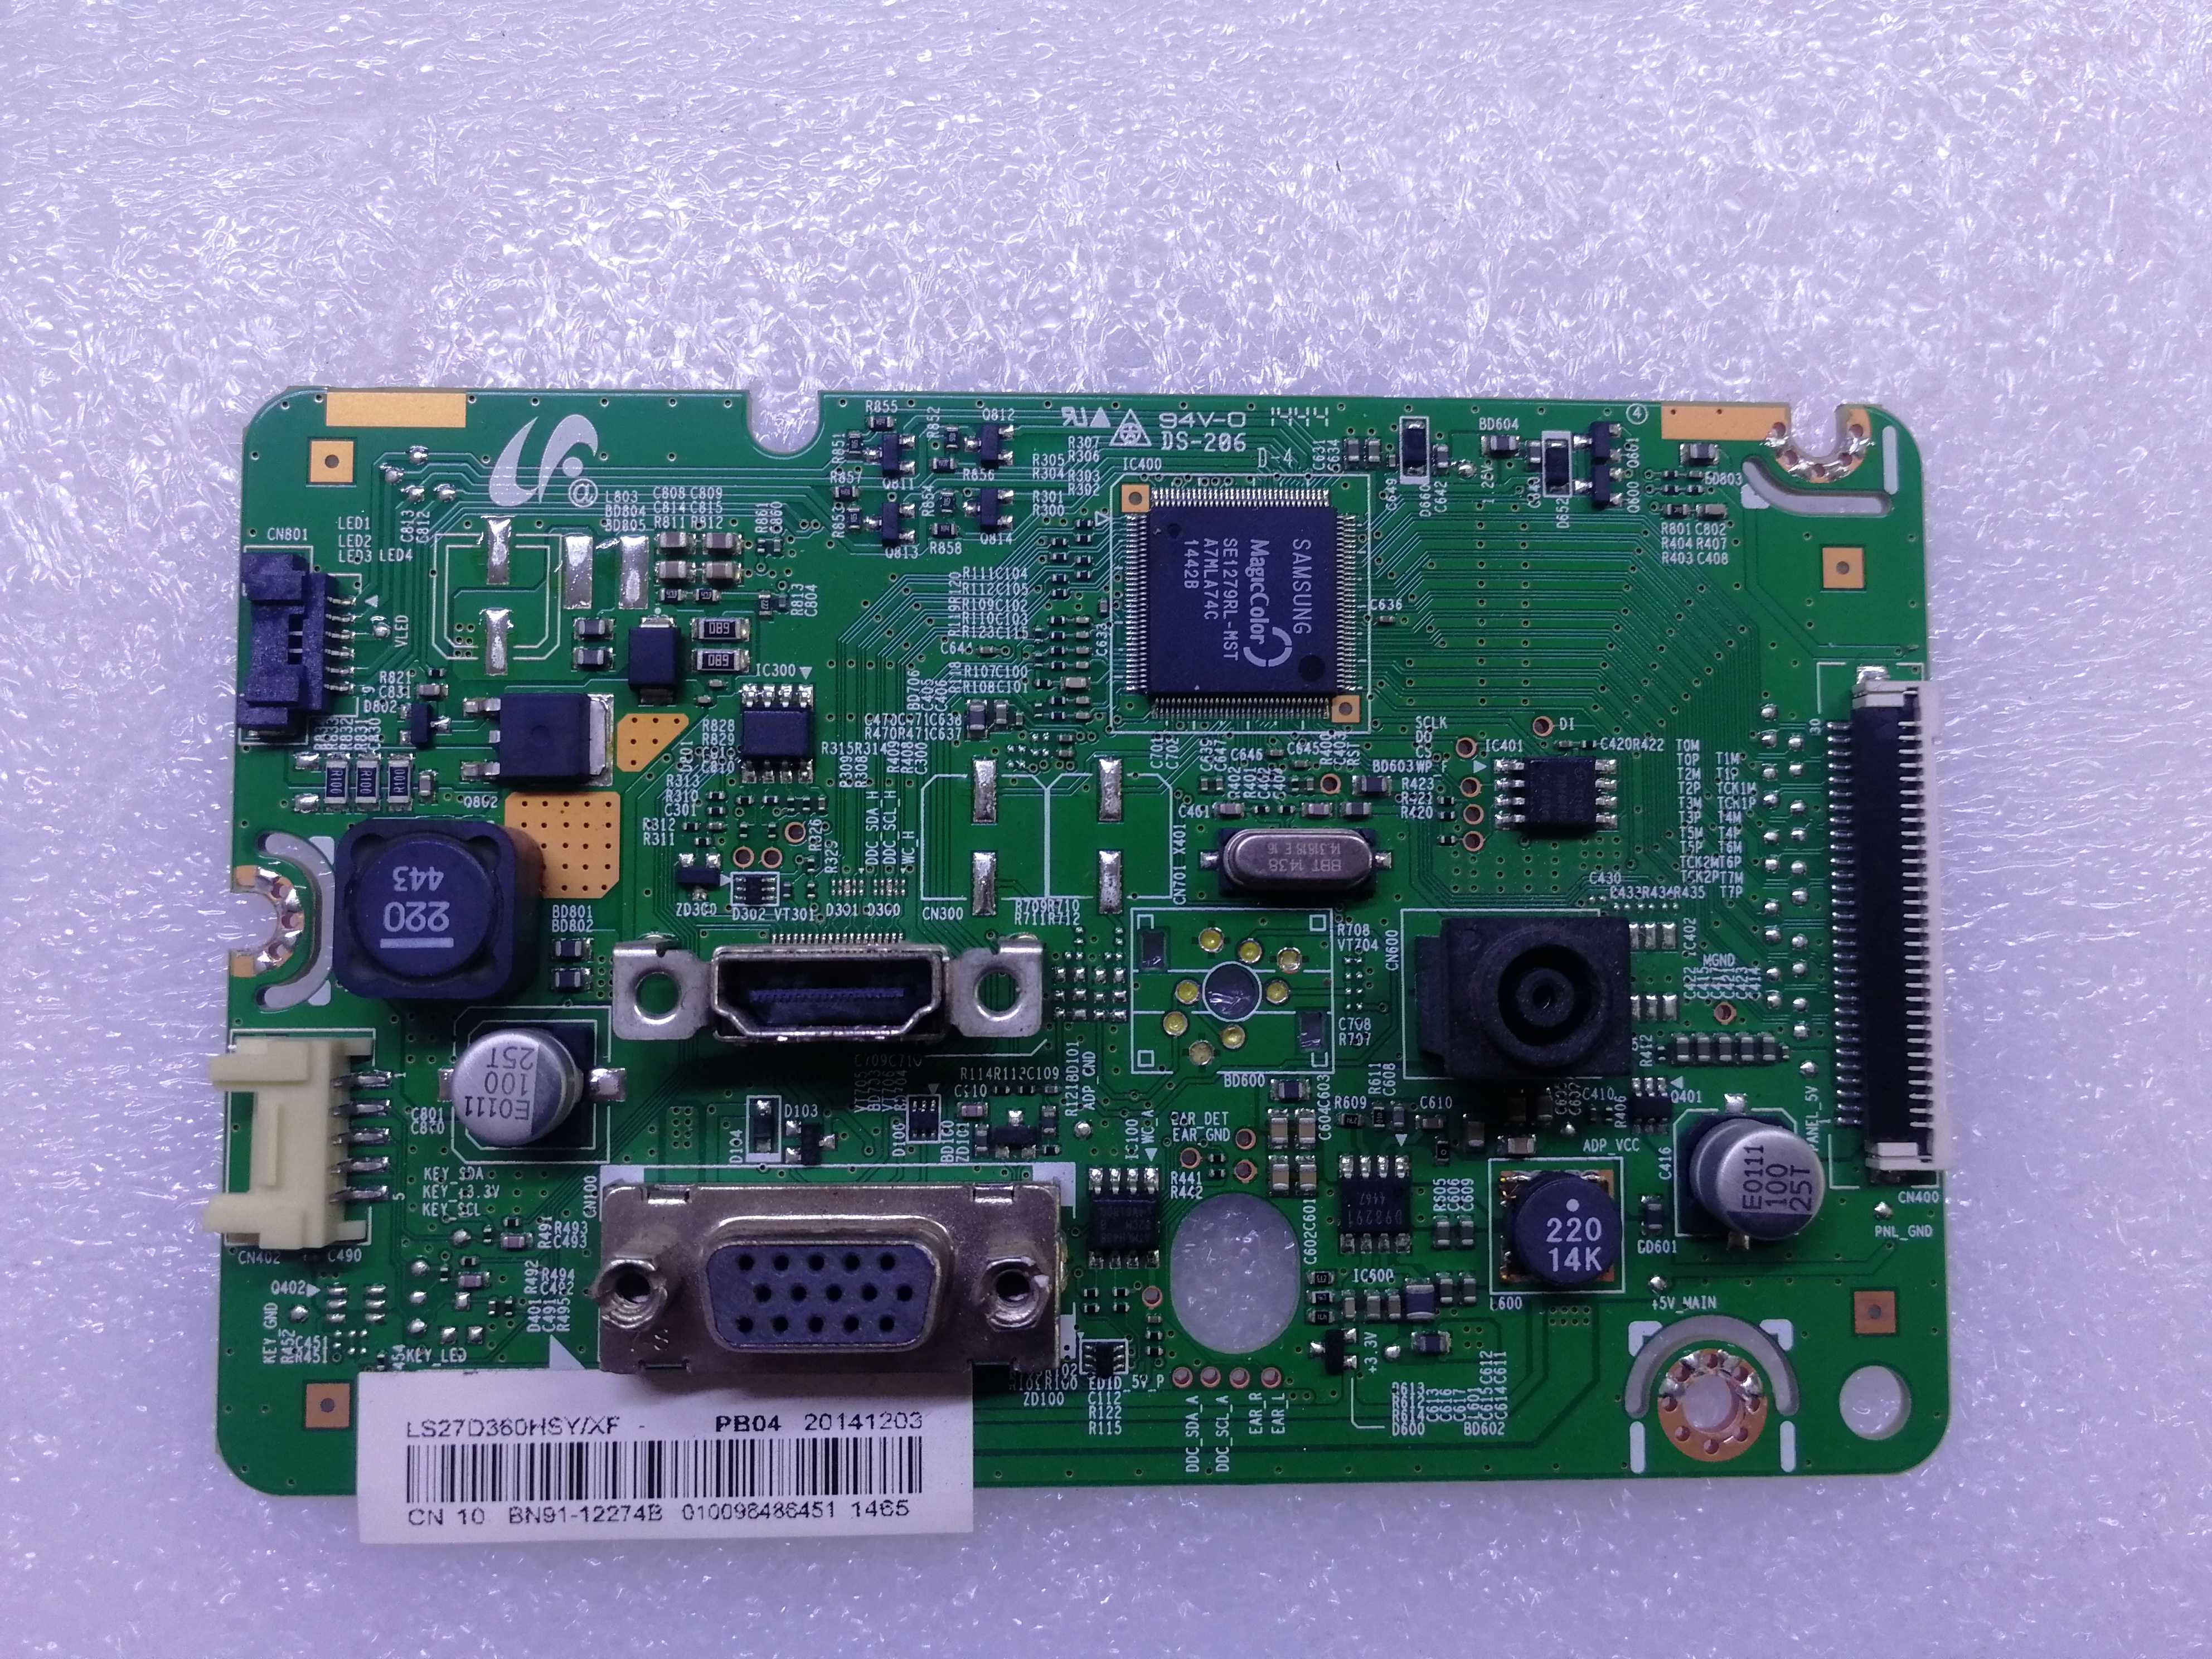 Tested 27" Samsung S27D390HL S27D390H BN41-02175A Driver Board